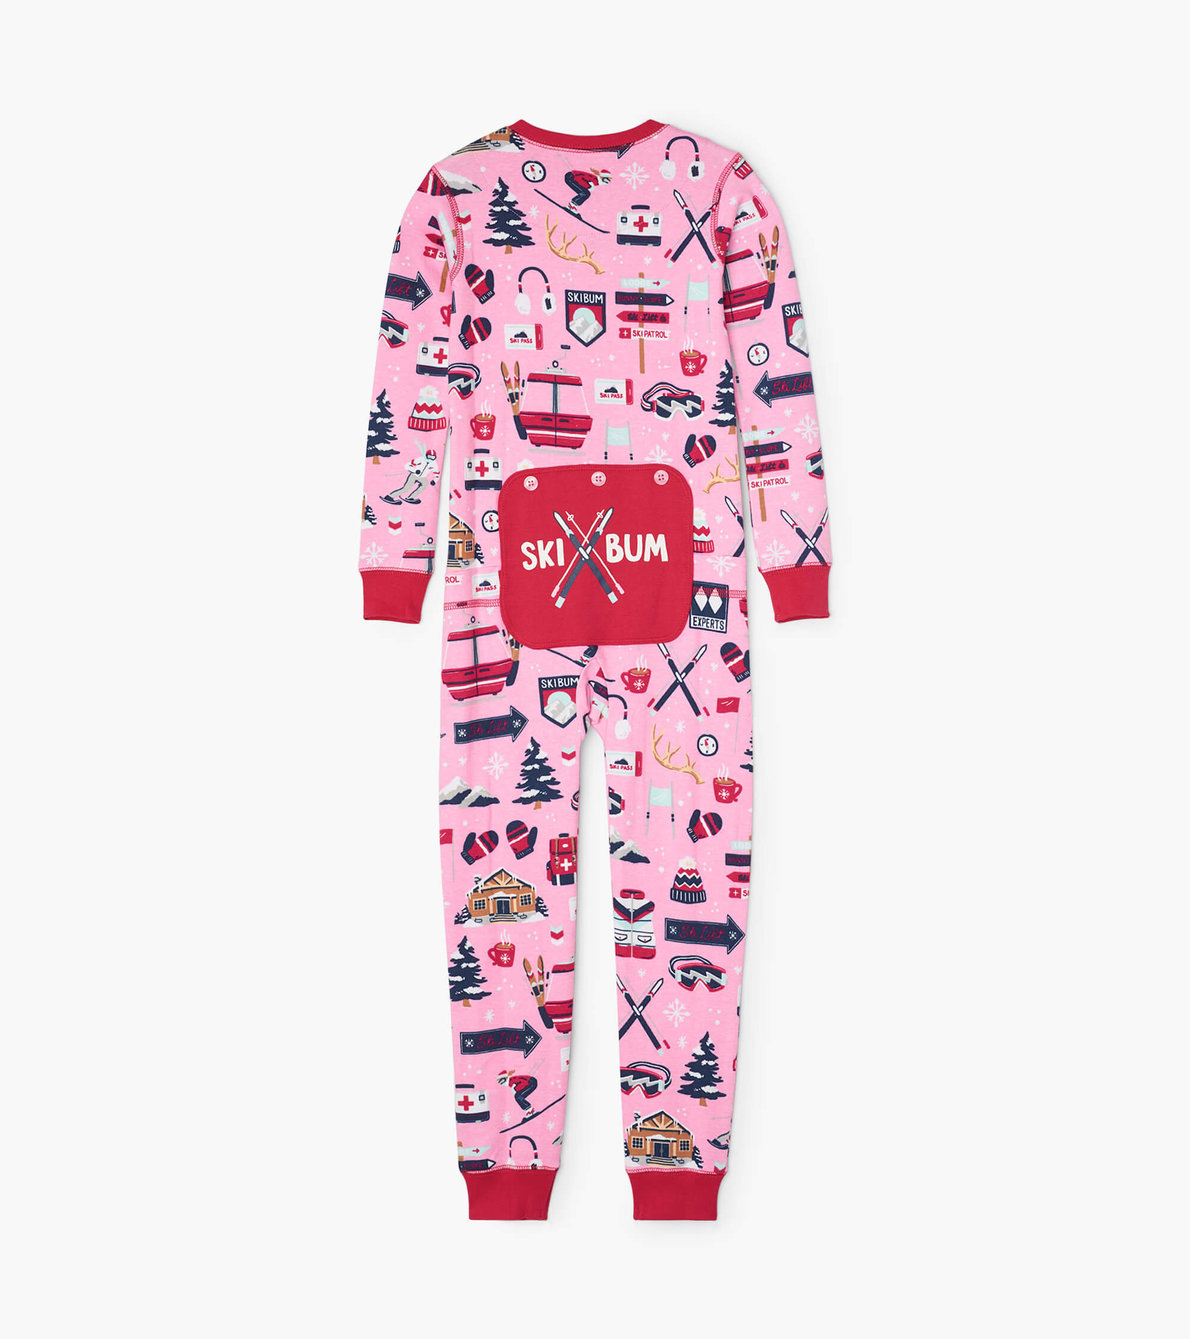 View larger image of Pink Ski Holiday Kids Union Suit